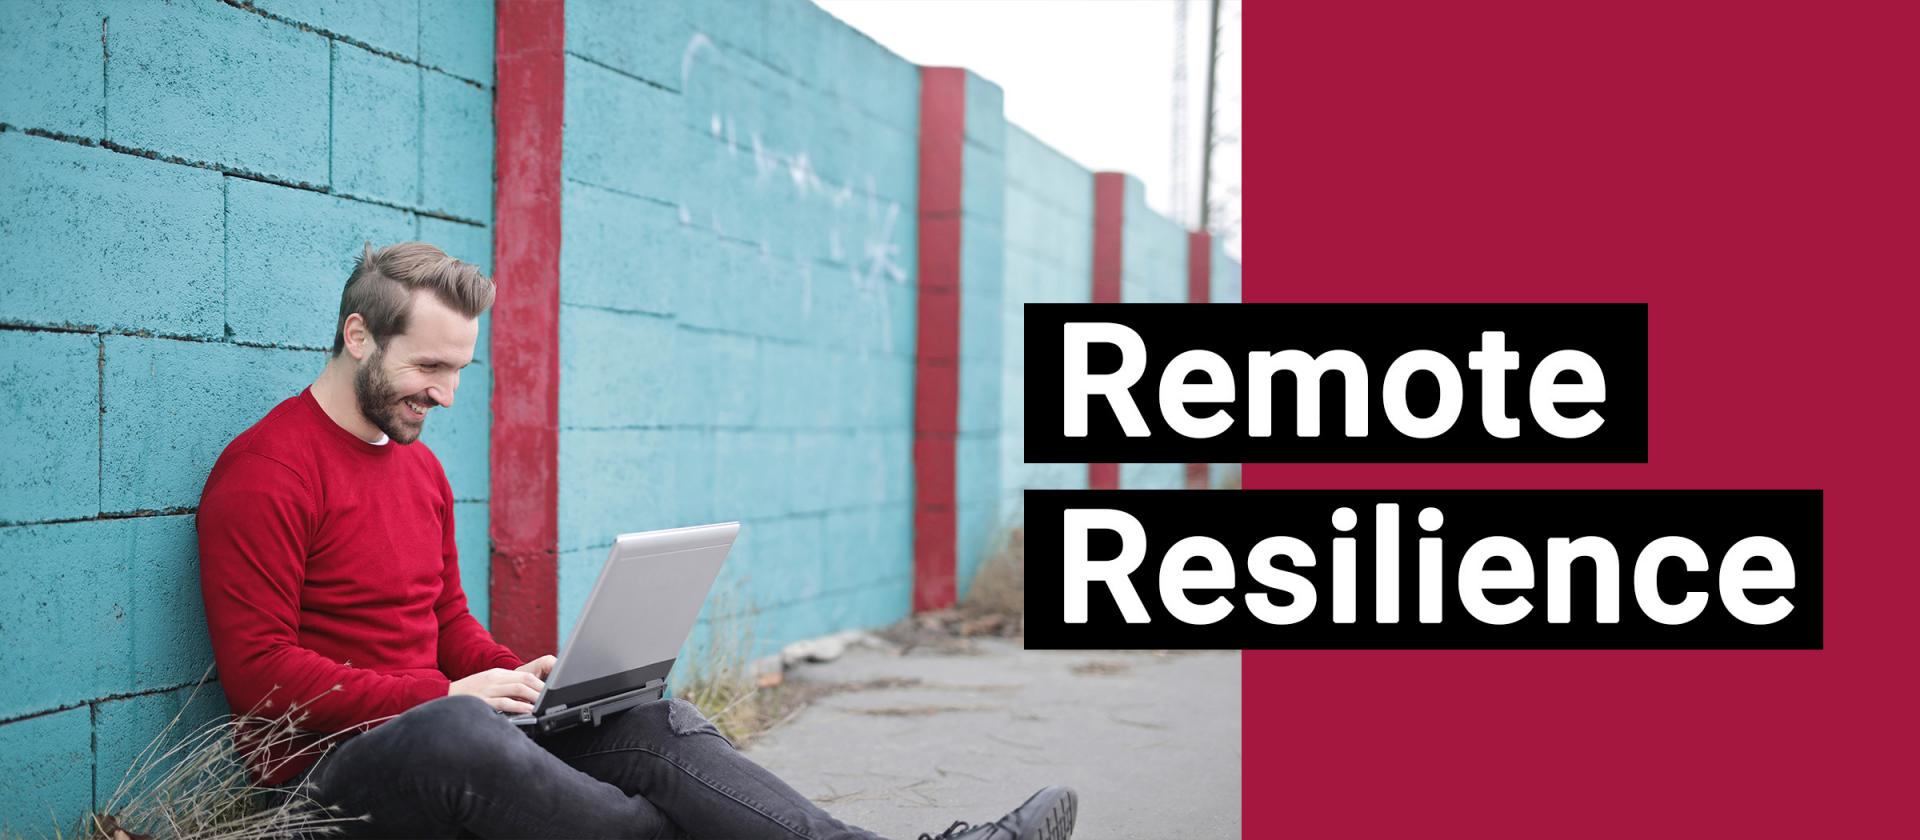 Remote Resilience